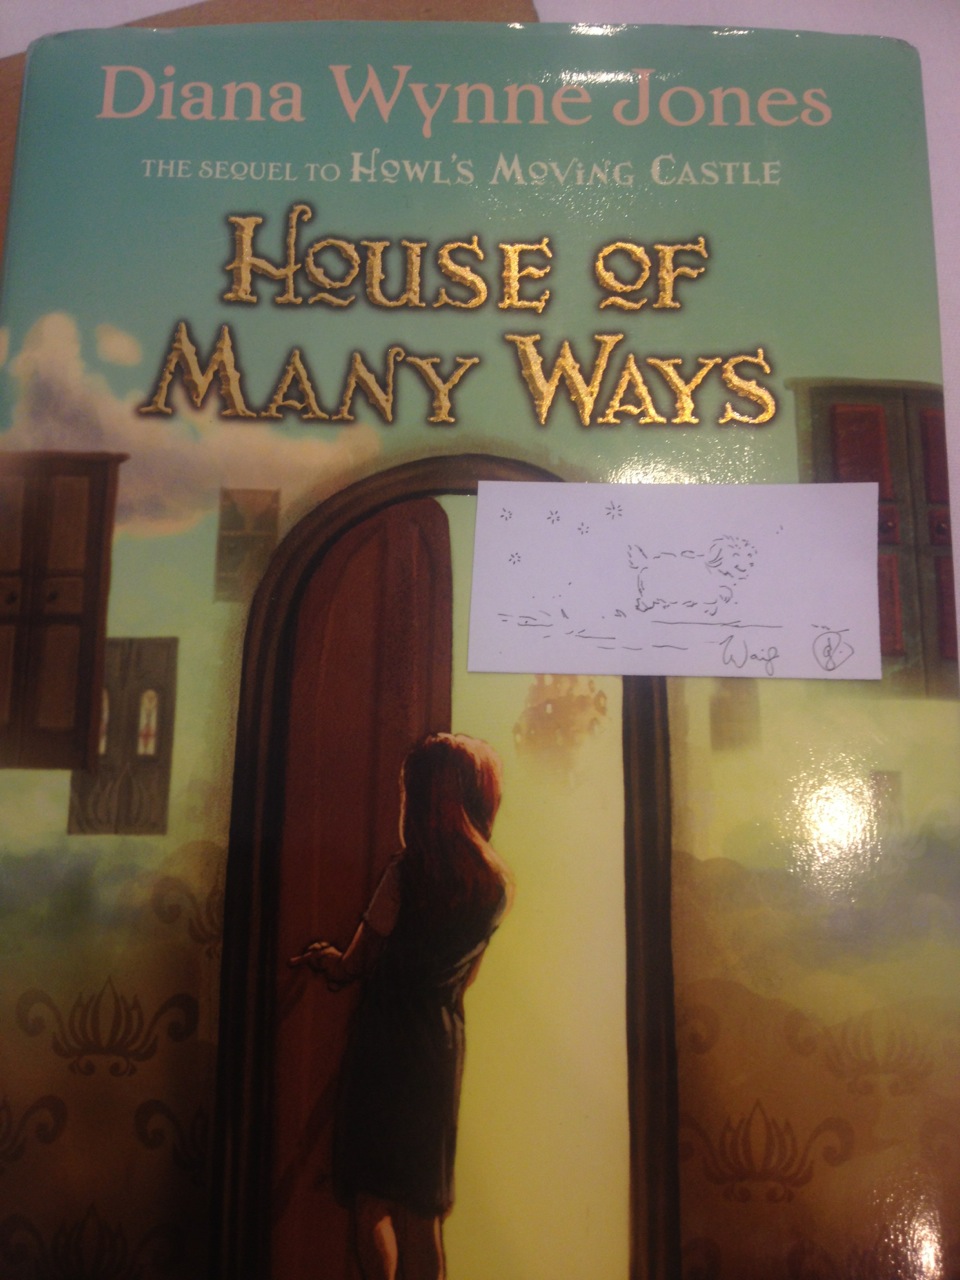 One of the prizes for the book giveaway, with bonus sketch by yours truly.